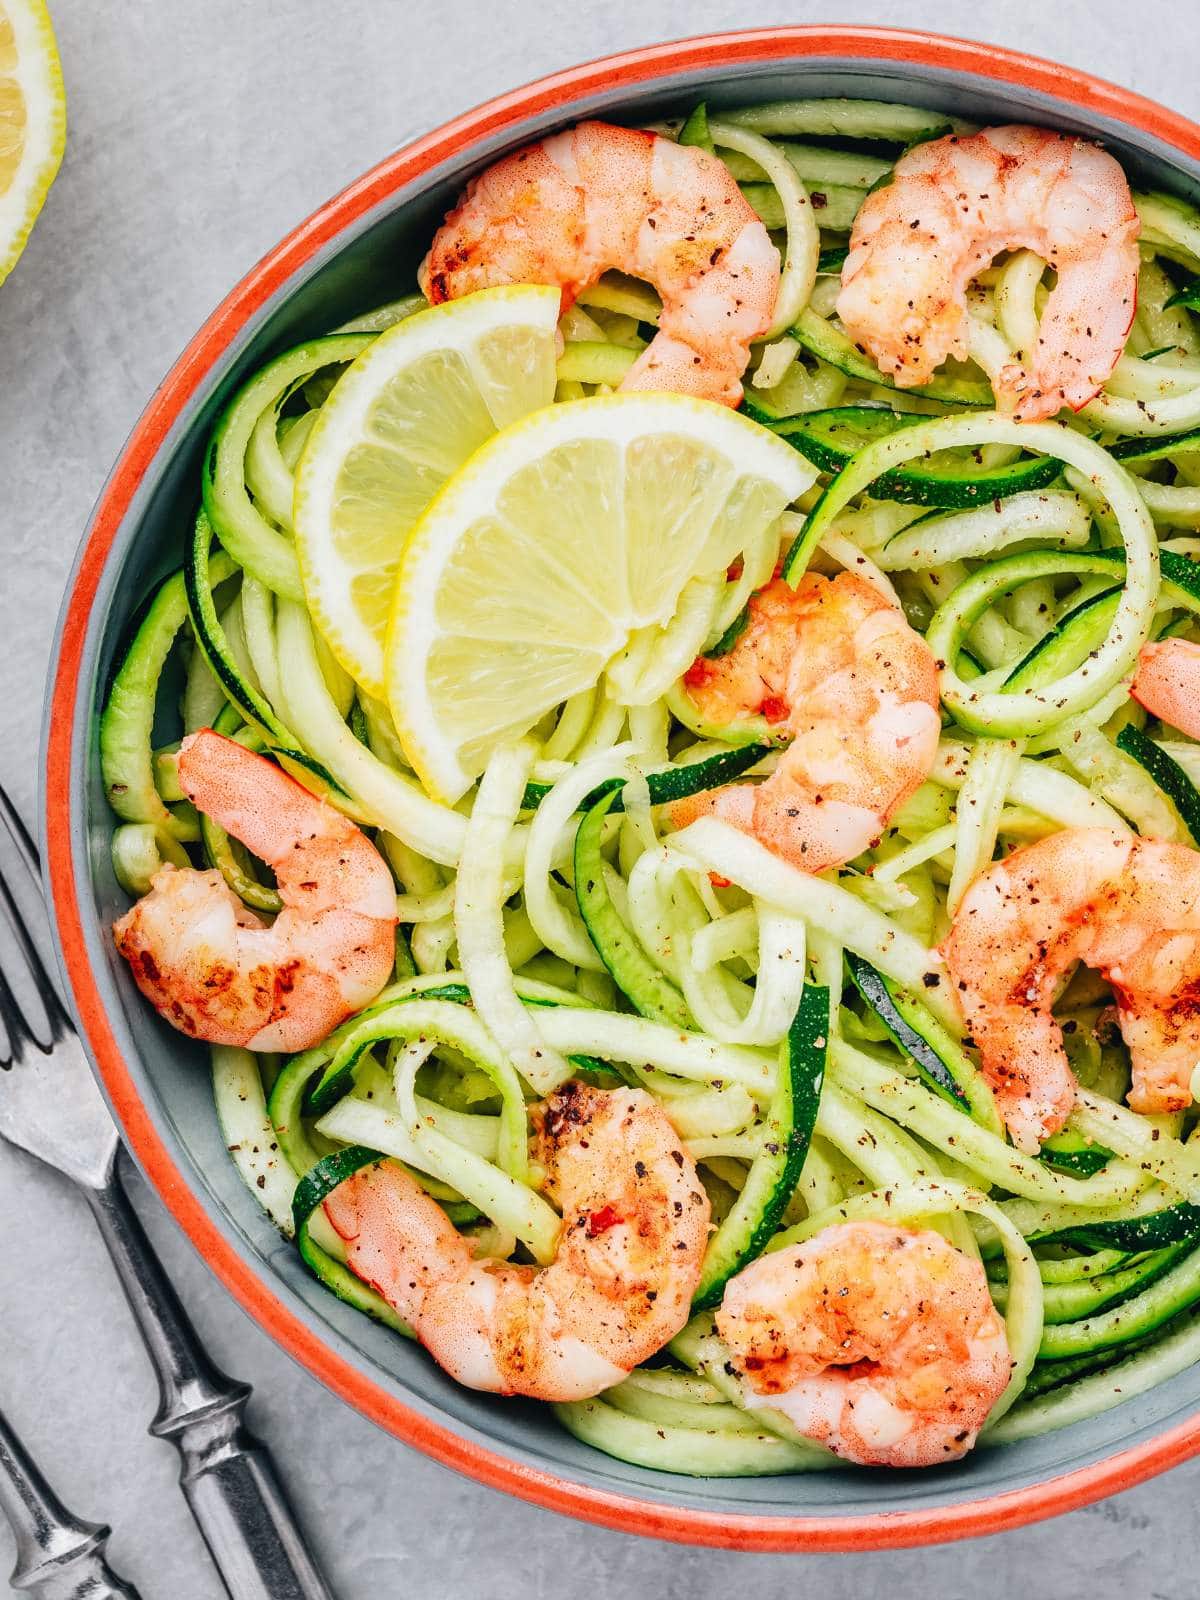 A bowl of zucchini noodles topped with grilled shrimp and lemon slices, with a fork and knife on the side.